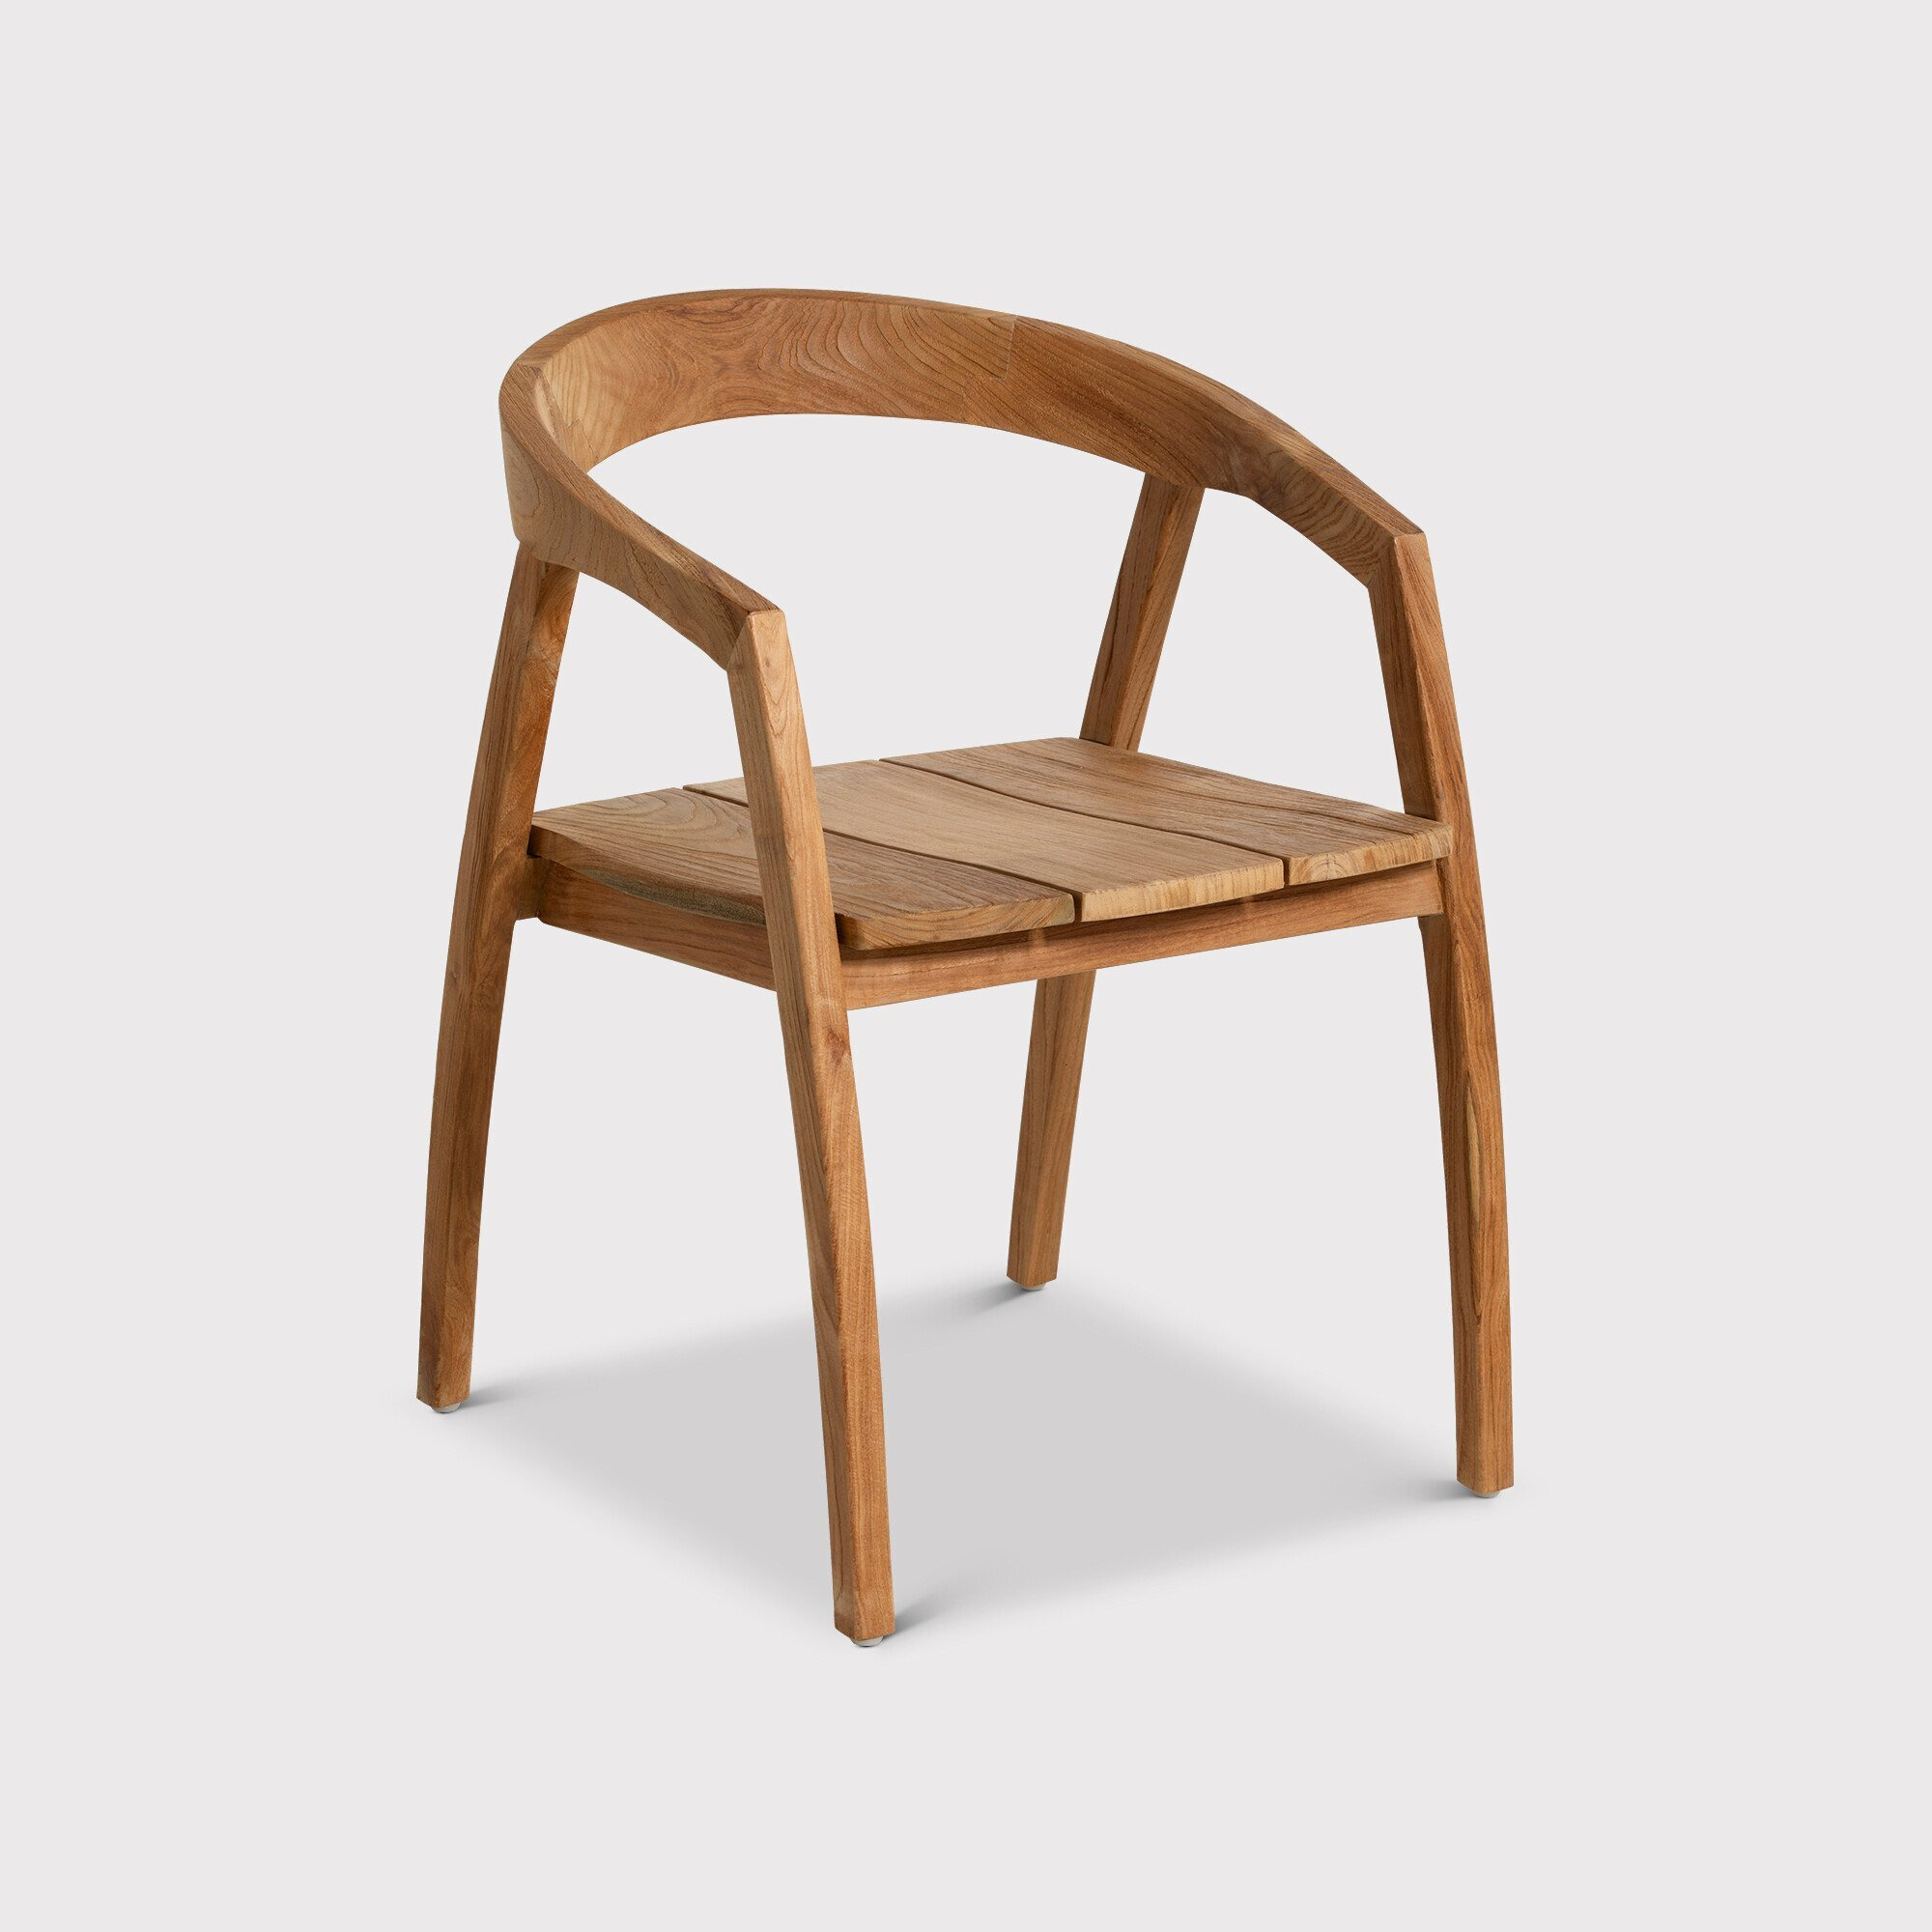 Grenada Jati Outdoor A Dining Chair, Neutral Wood - Barker & Stonehouse - image 1